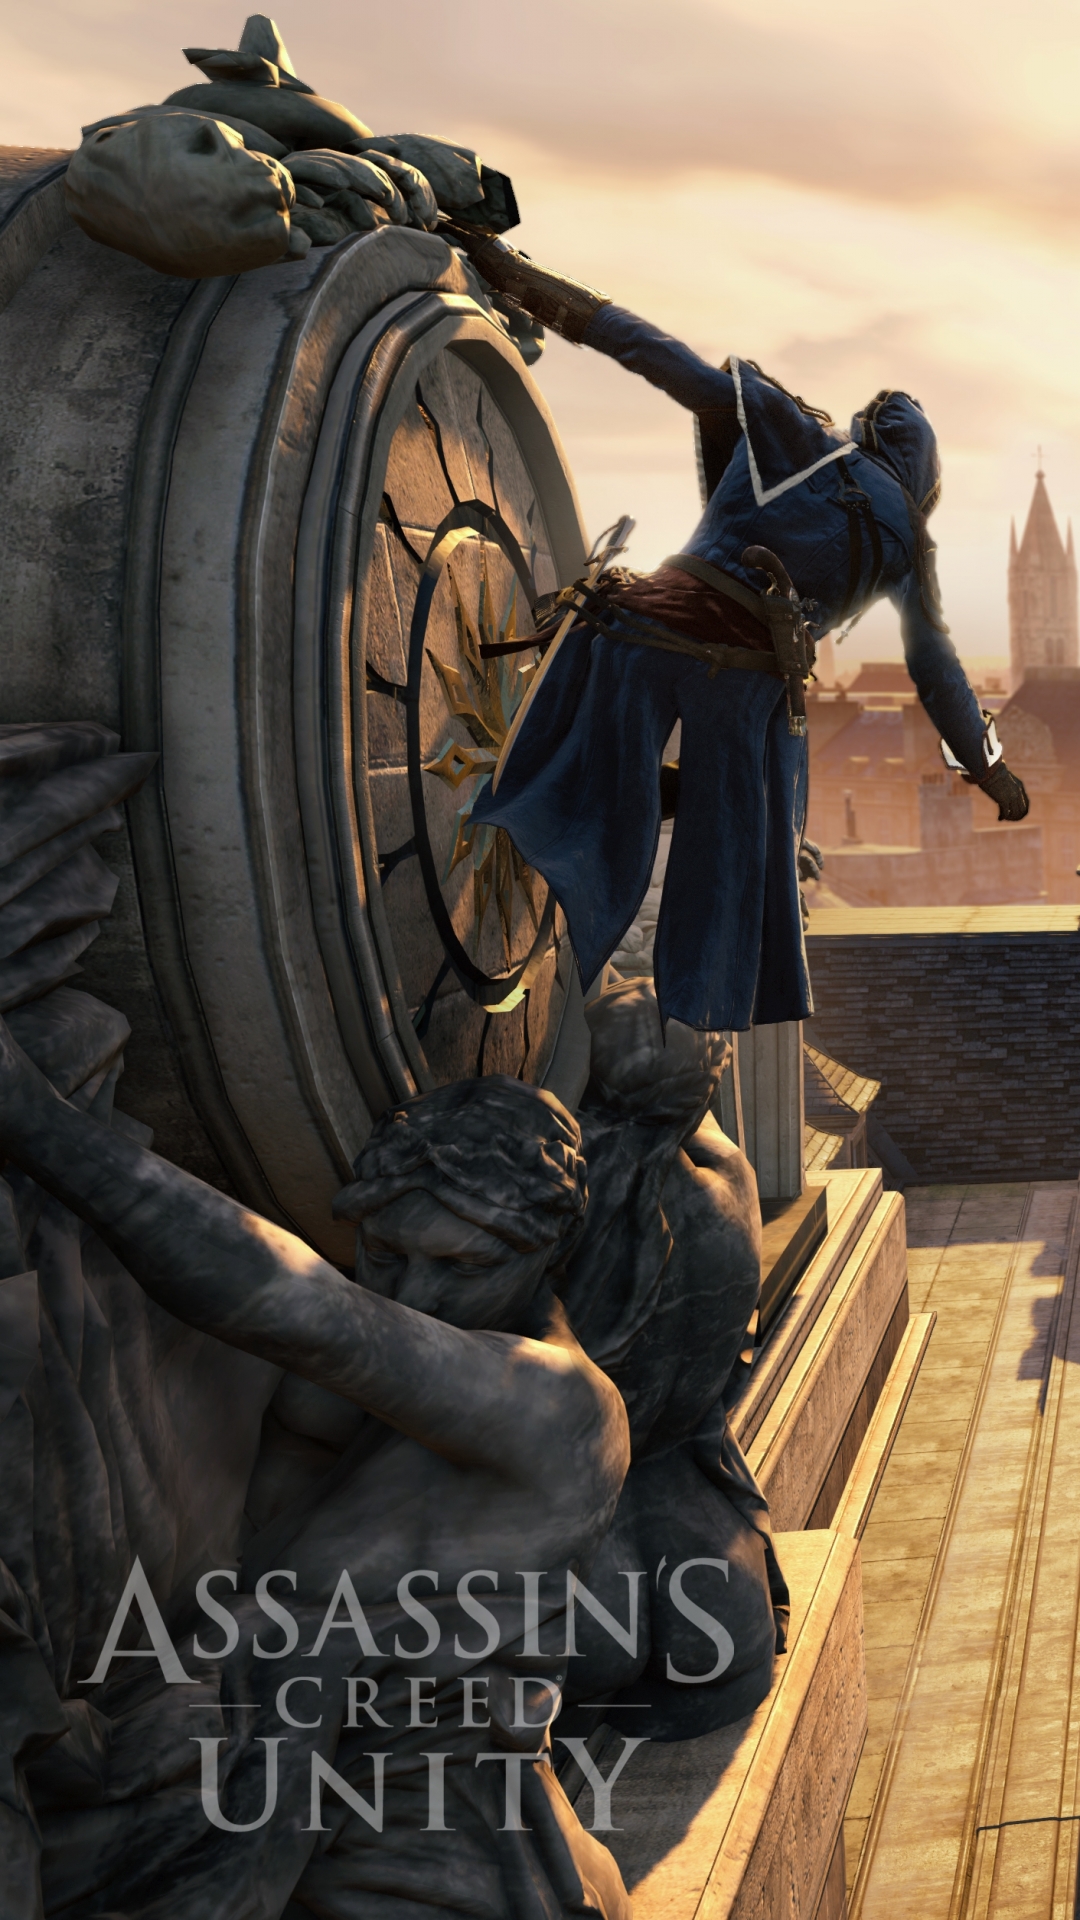 Assassin's Creed: Unity Phone Wallpaper - Mobile Abyss